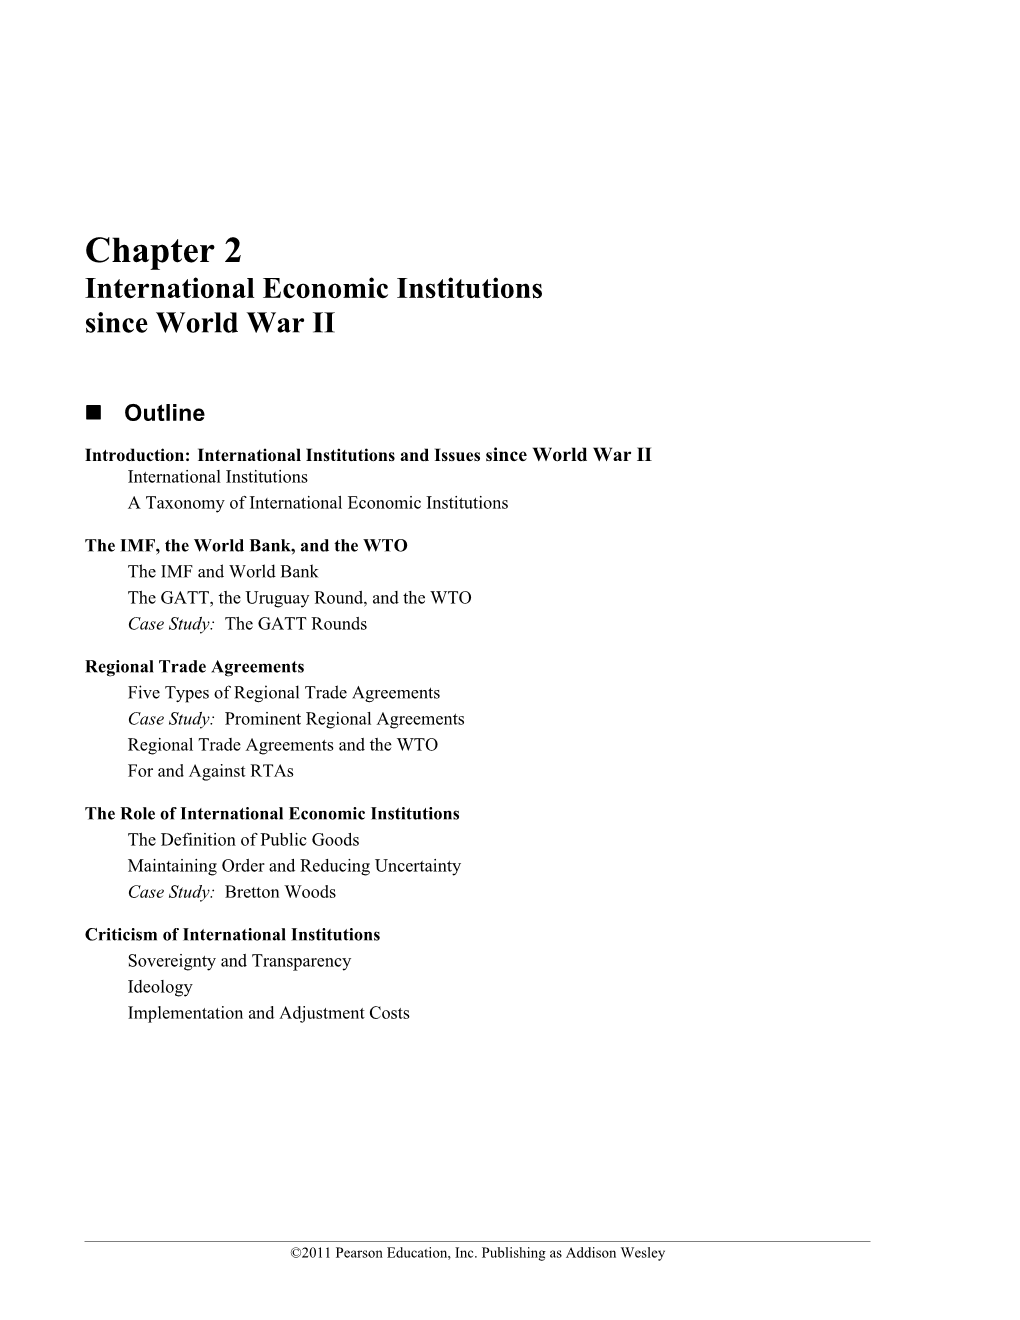 Introduction:International Institutions and Issuessince World War II